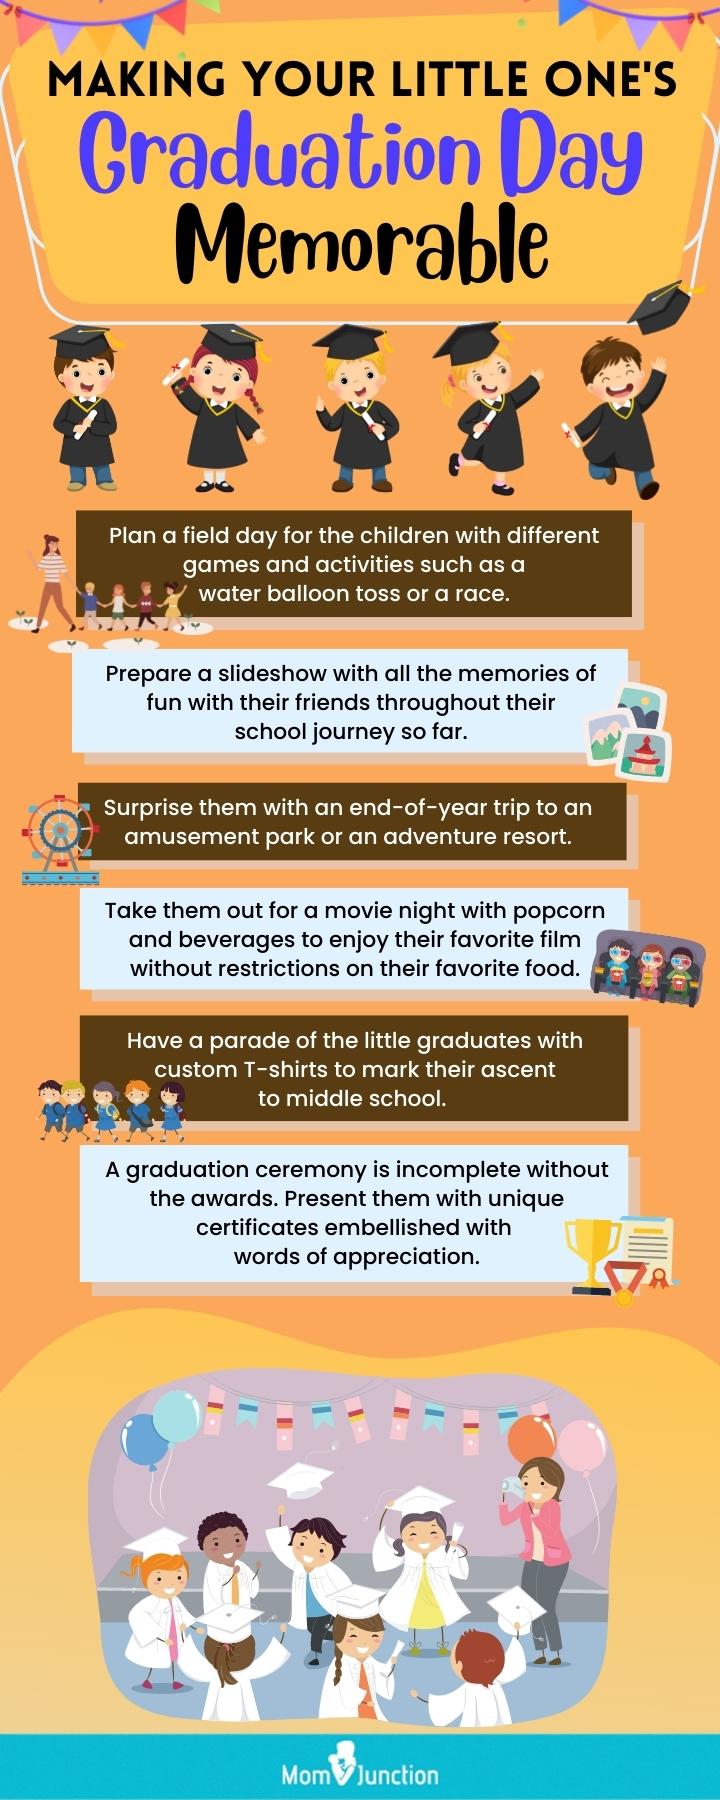 making your little ones graduation day memorable(infographic)